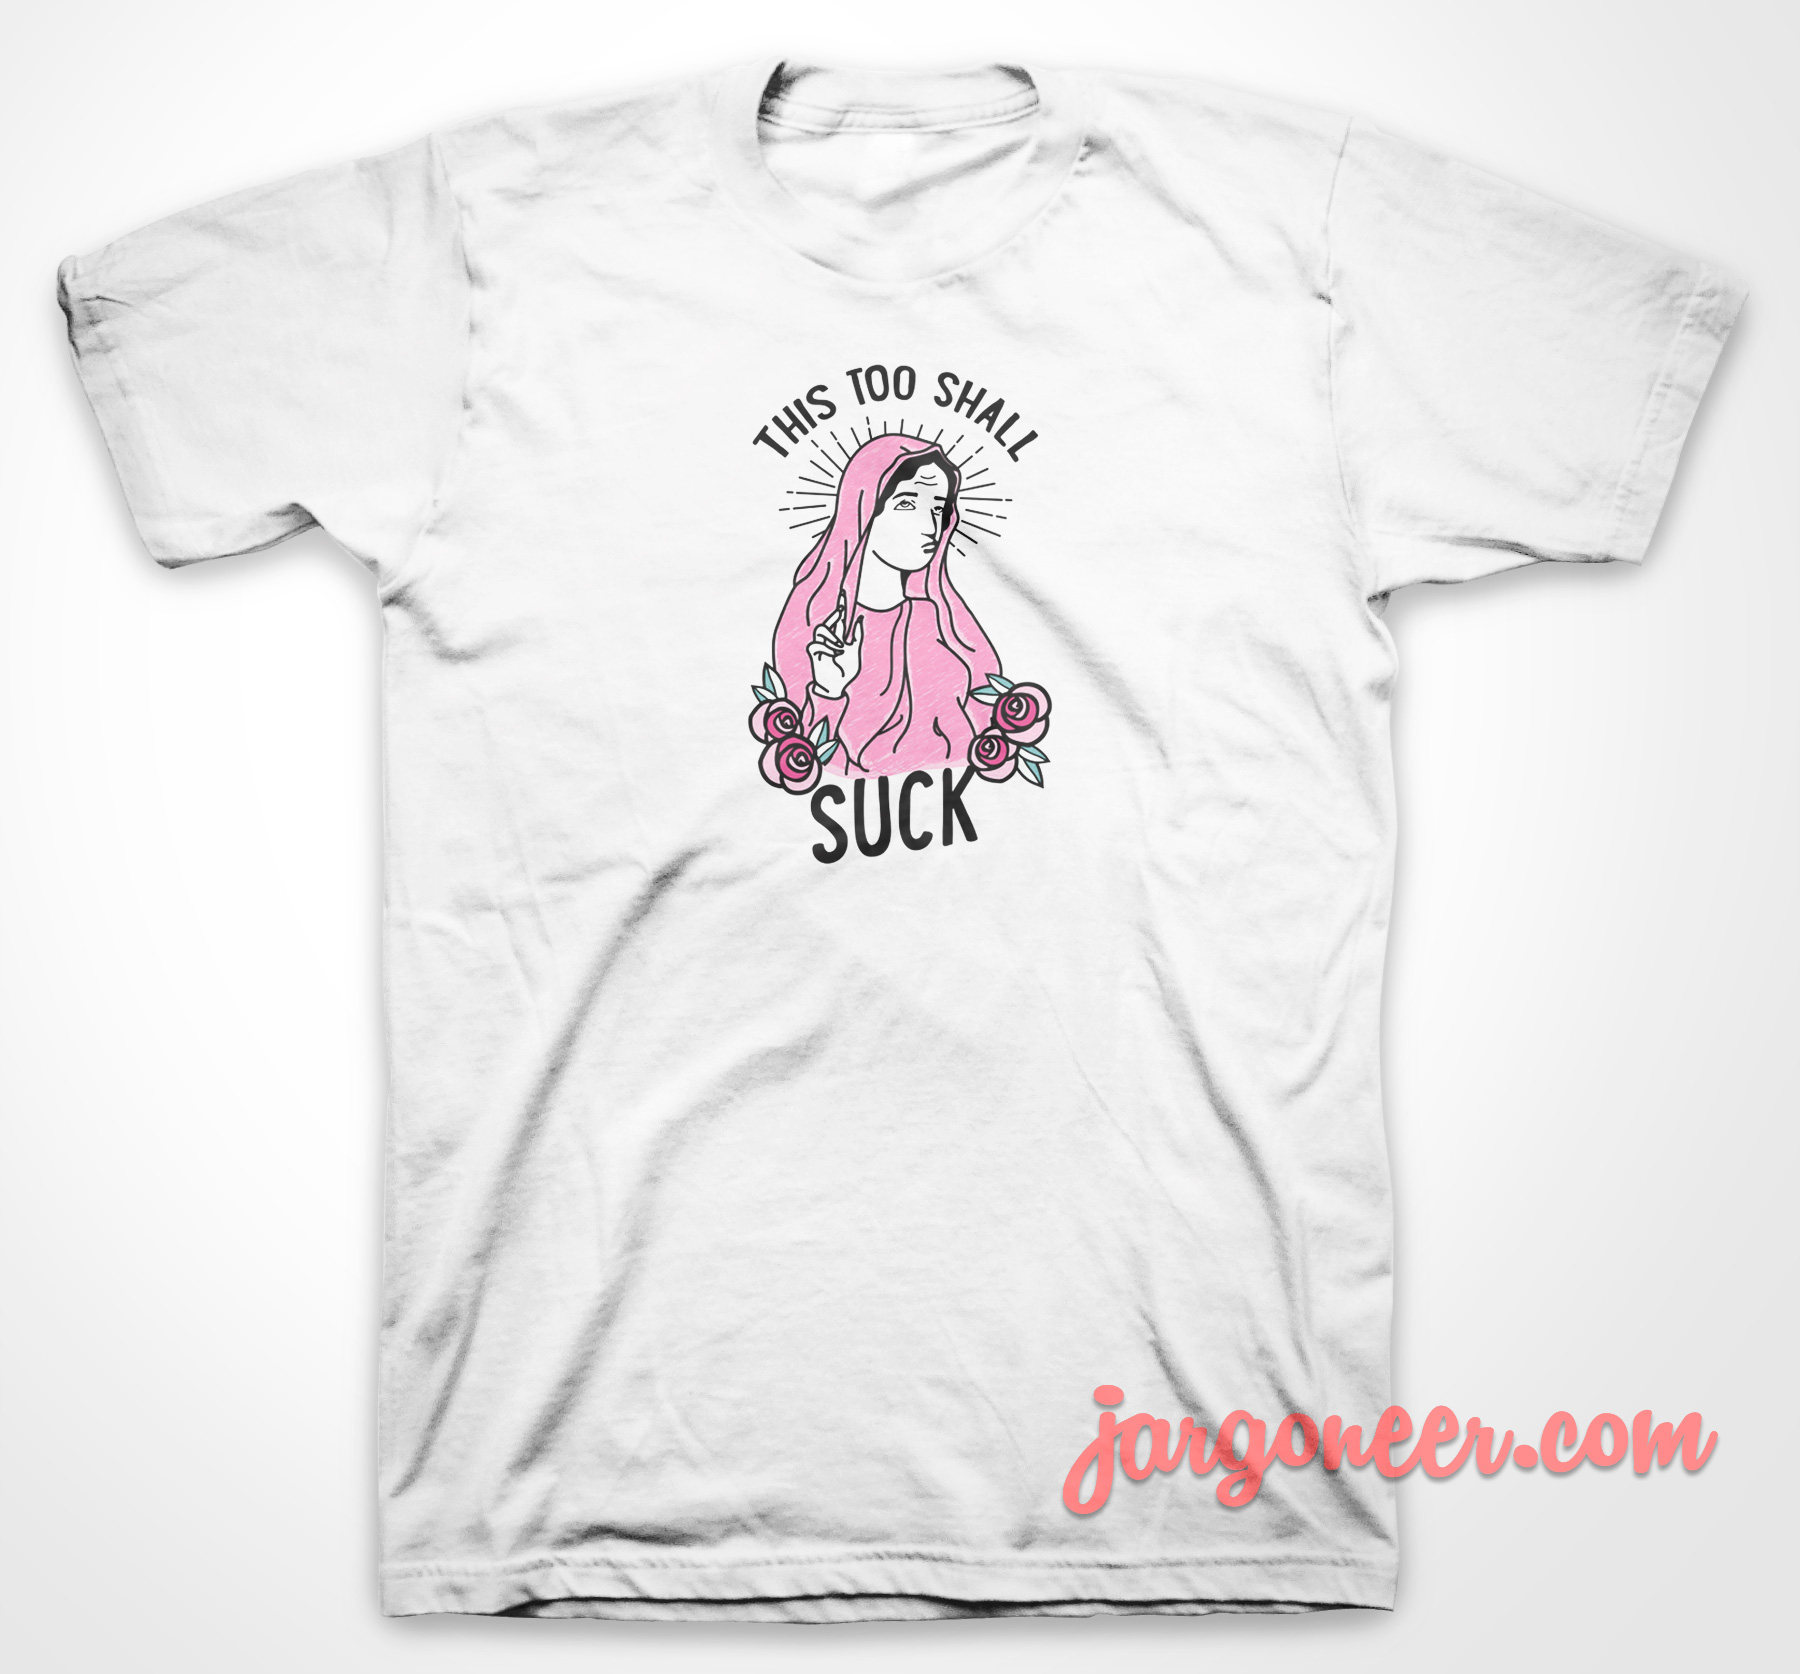 This Too Shall Suck - Shop Unique Graphic Cool Shirt Designs